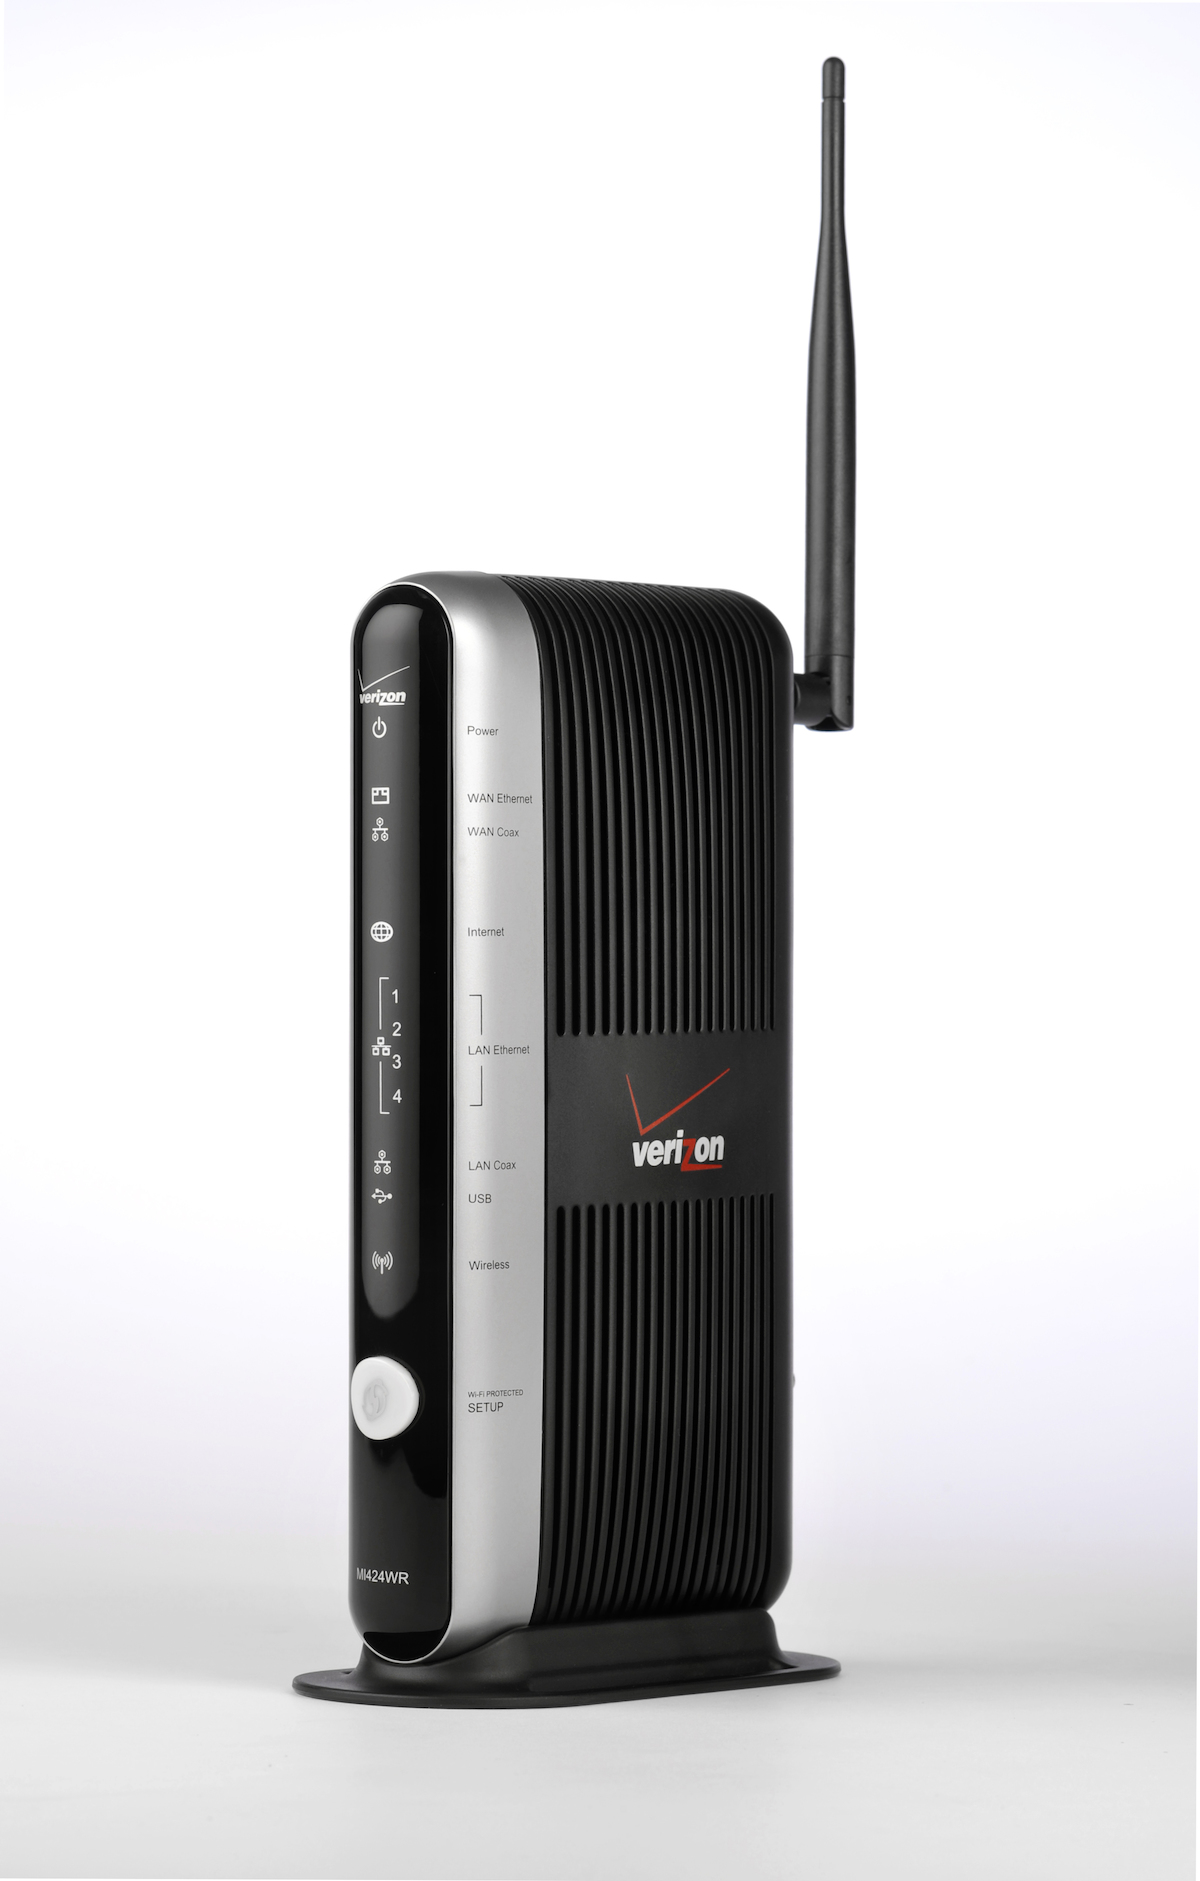 Everything About the Actiontec MI424WR GEN3I Router